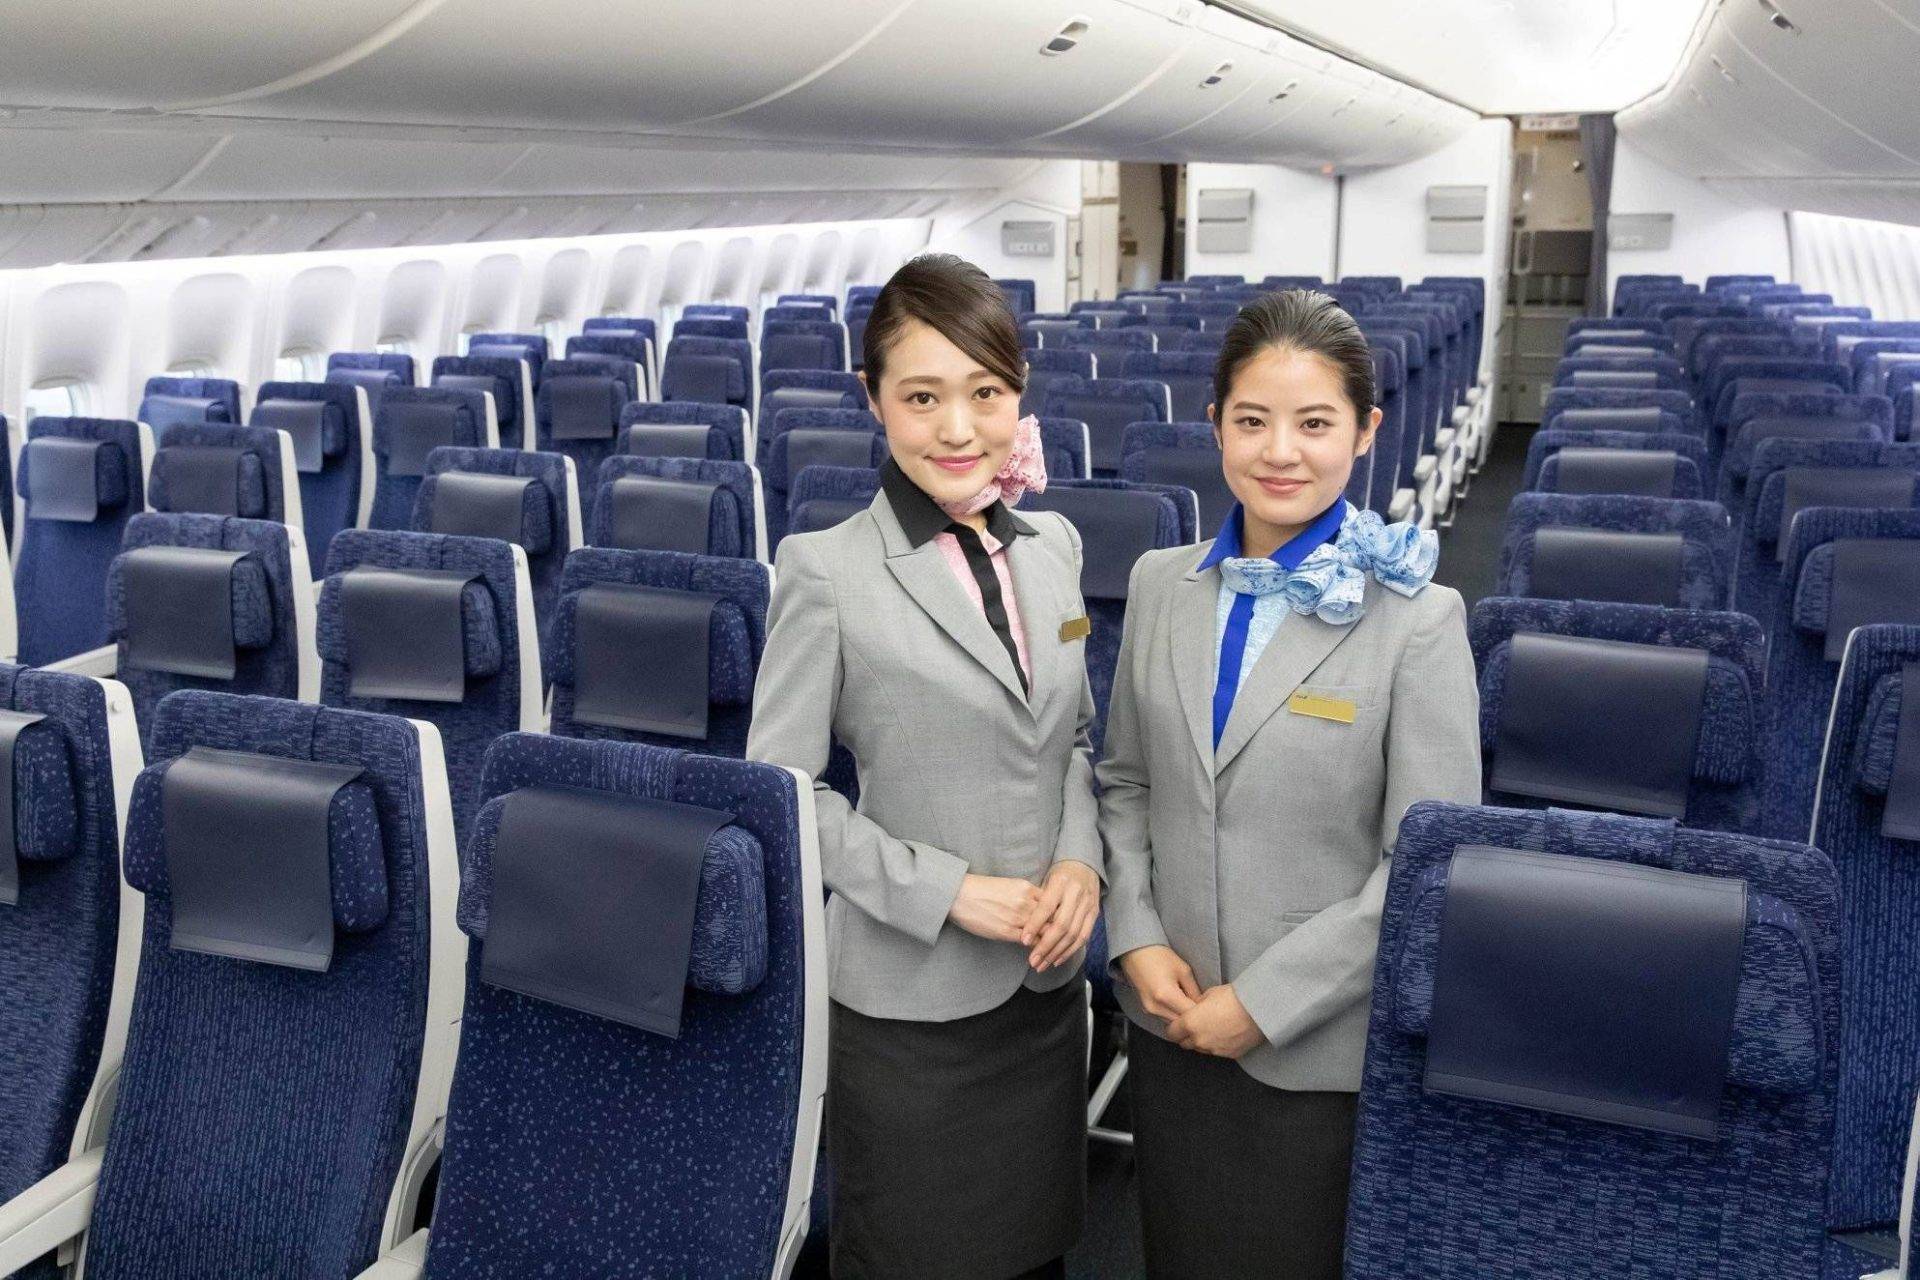 All nippon airways [ana] review – seats, amenities, customer service, baggage fees, and more